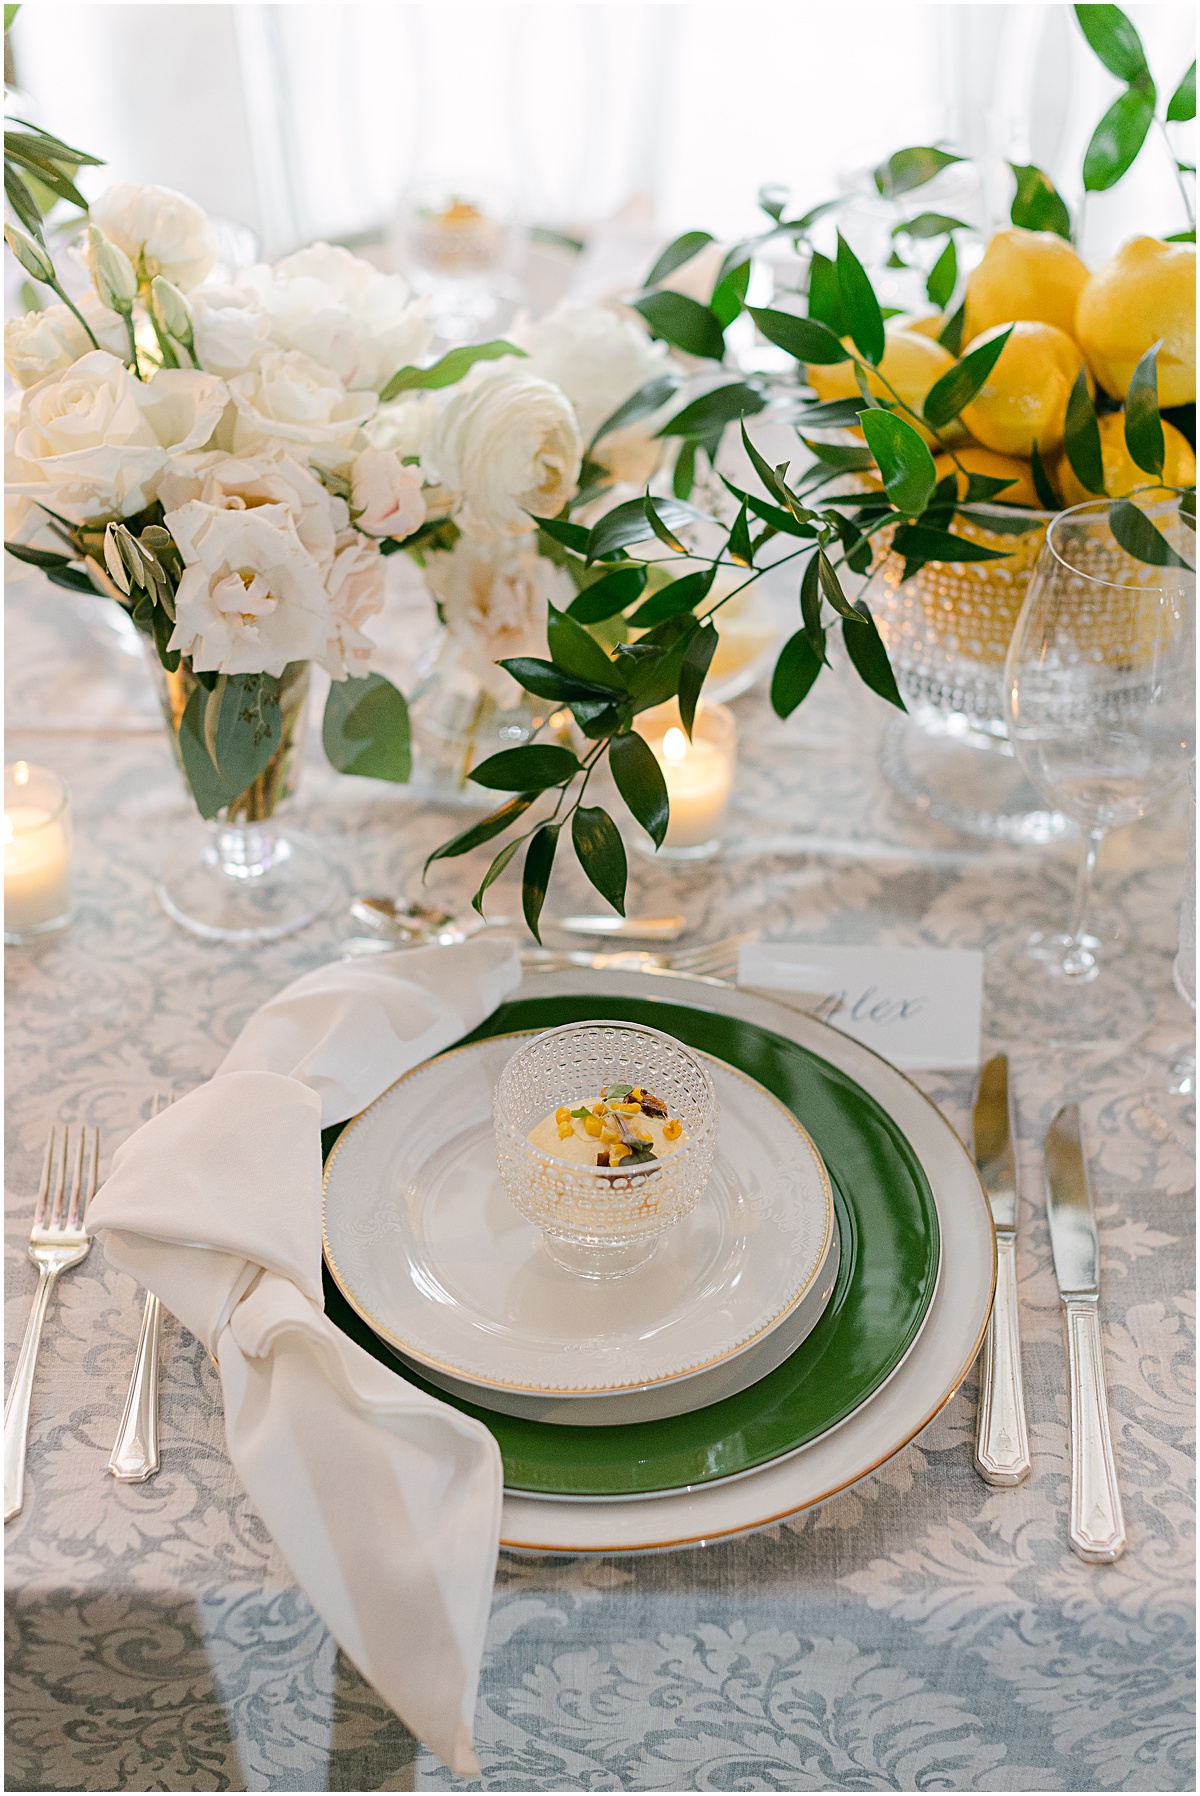 Reception place setting at Lemon-themed wedding at Congressional Country Club by Sarah Bradshaw